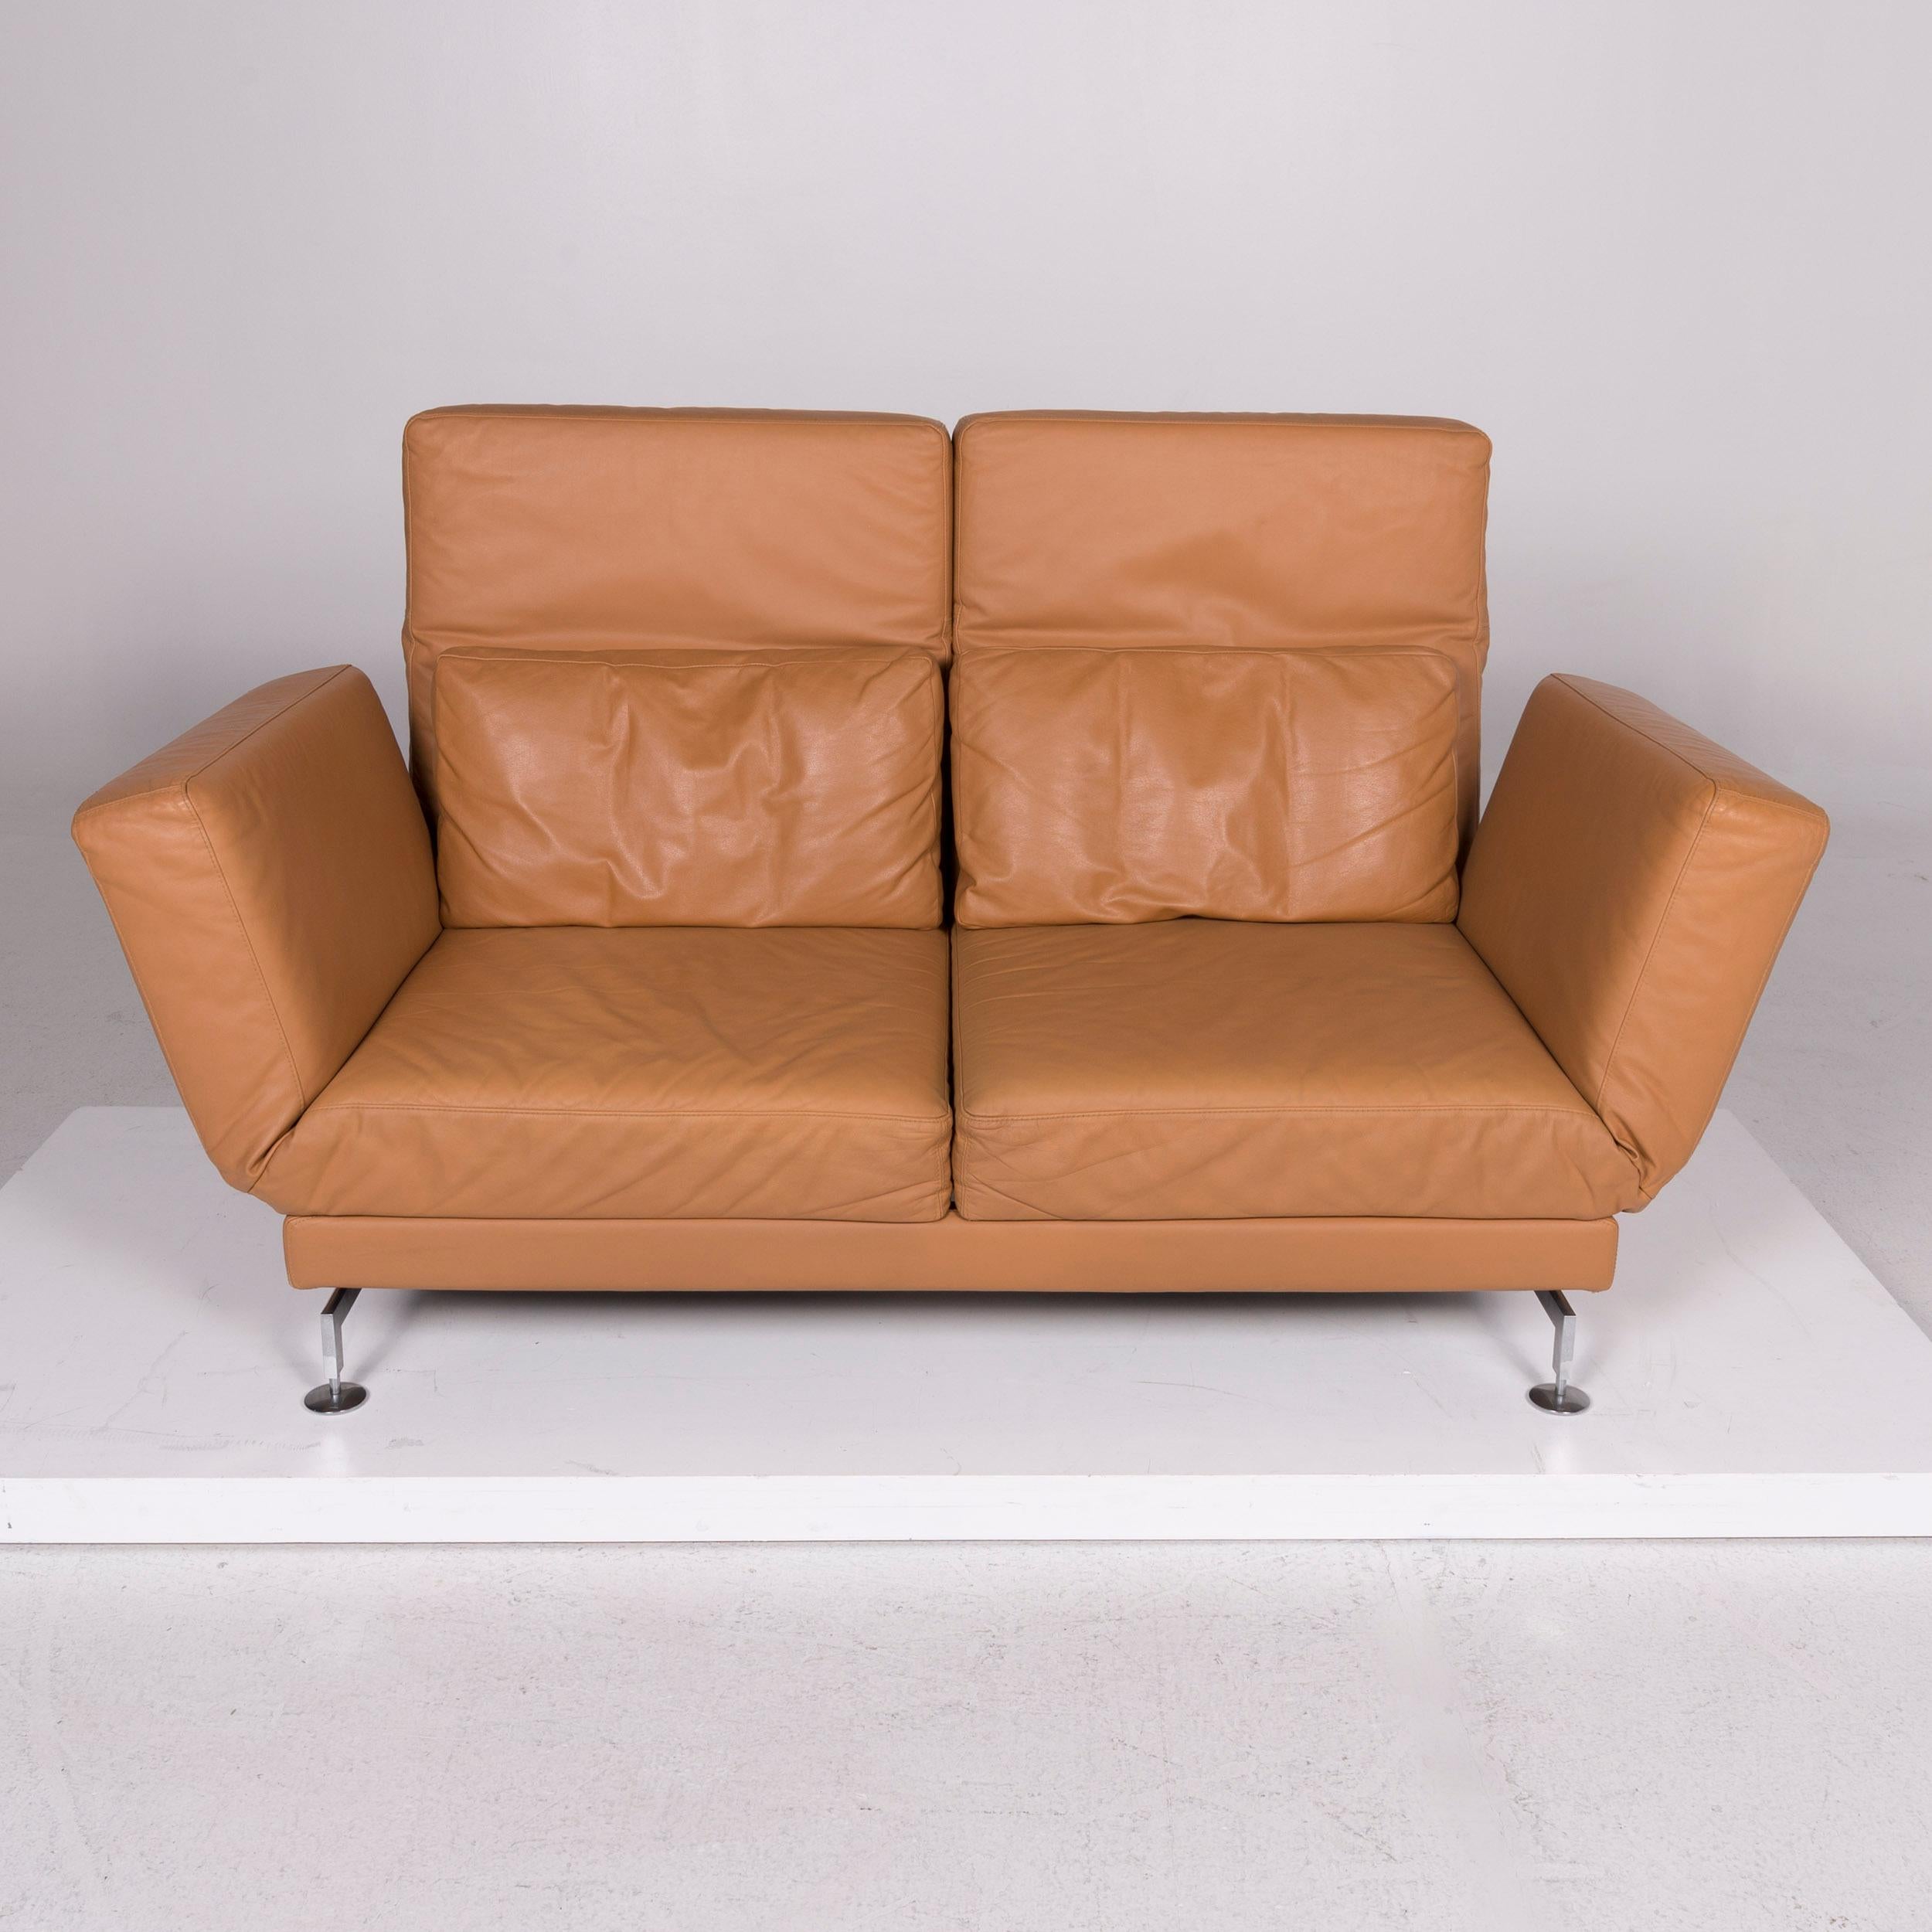 Brühl & Sippold Moule Leather Sofa Brown Two-Seat Incl. Function For Sale 1